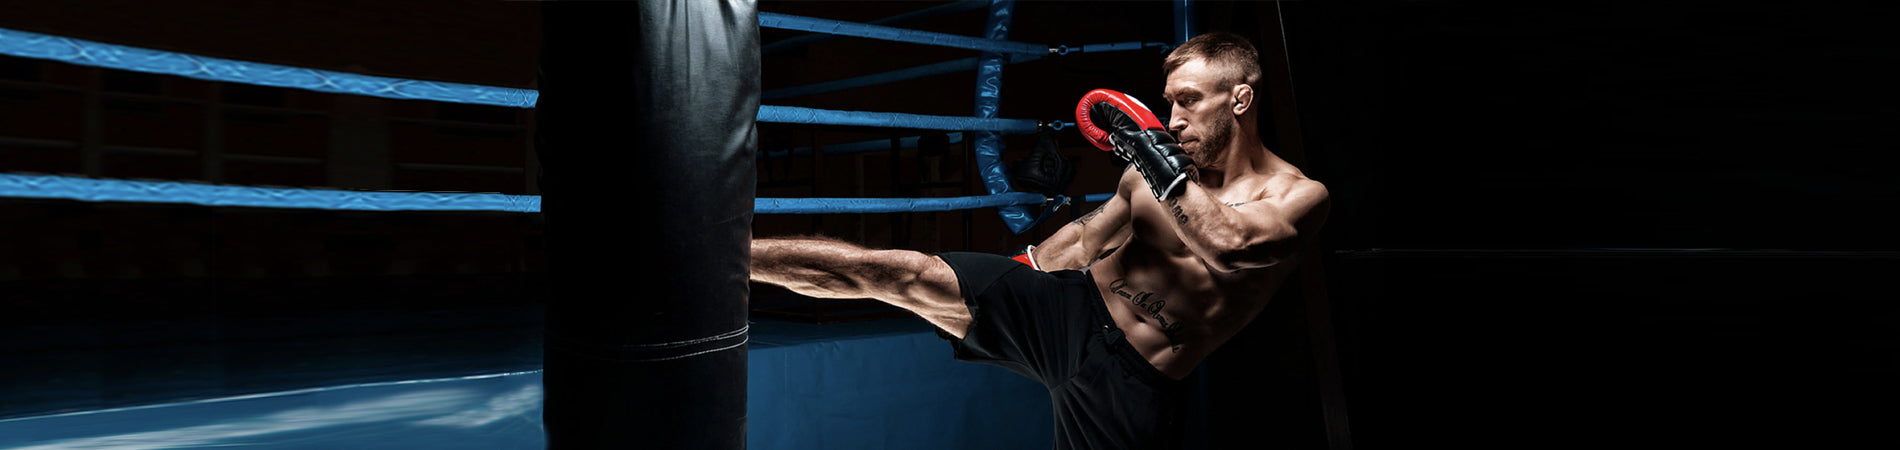 A Beginners Guide: How to Kick a Punching Bag